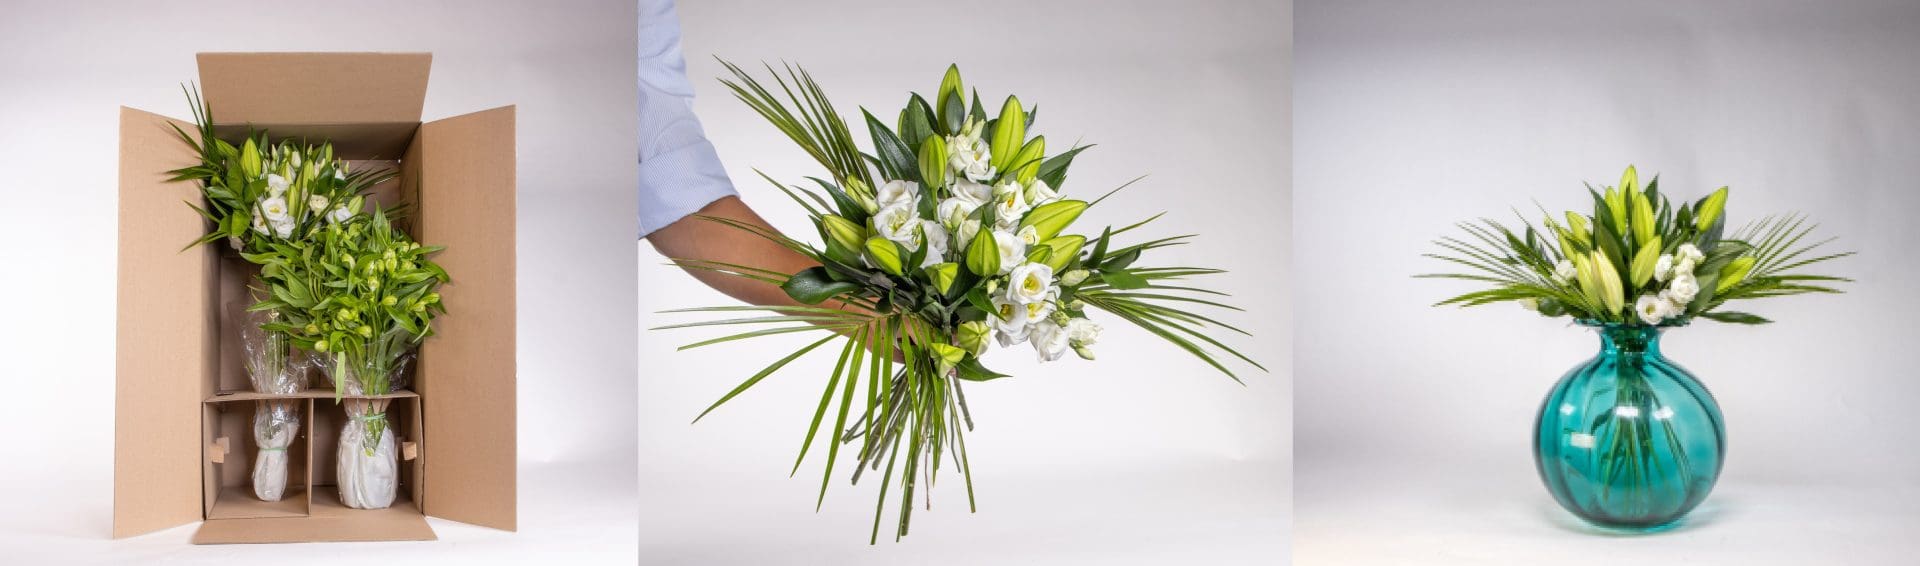 Three images showing how our loose flowers are delivered nationwide in a box and can then be put into your own vase.